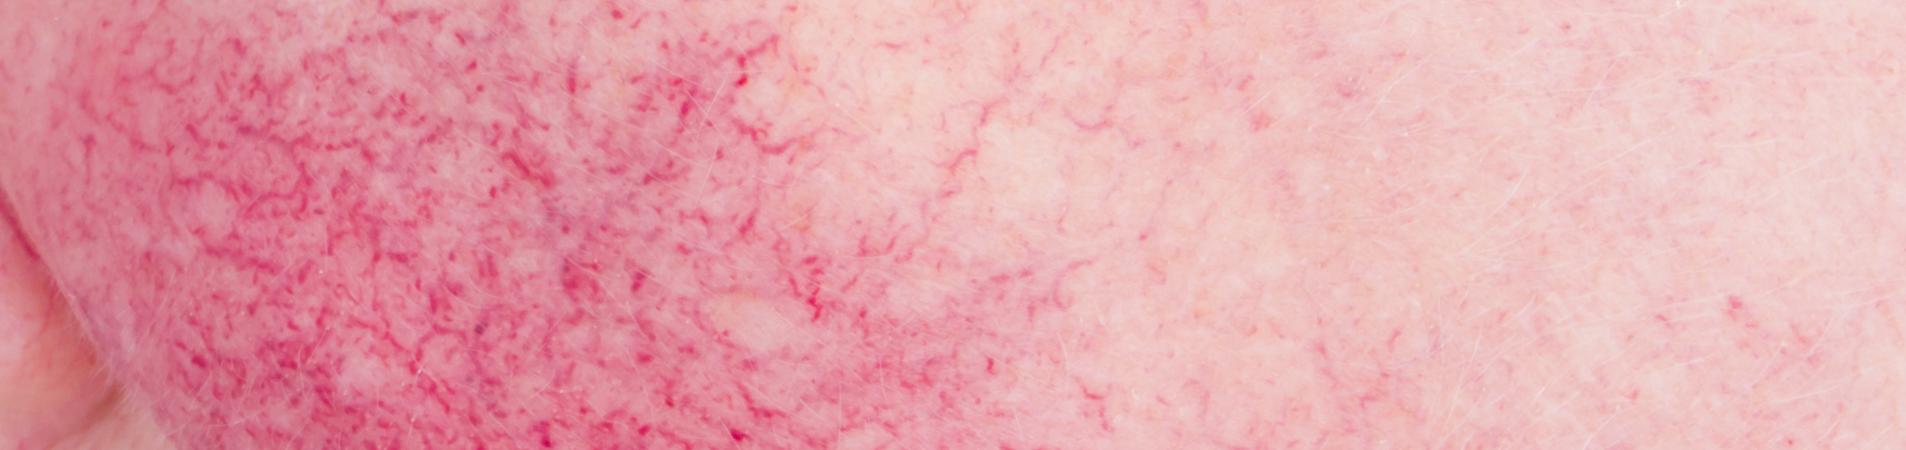 What does Rosacea look like? Bio-first